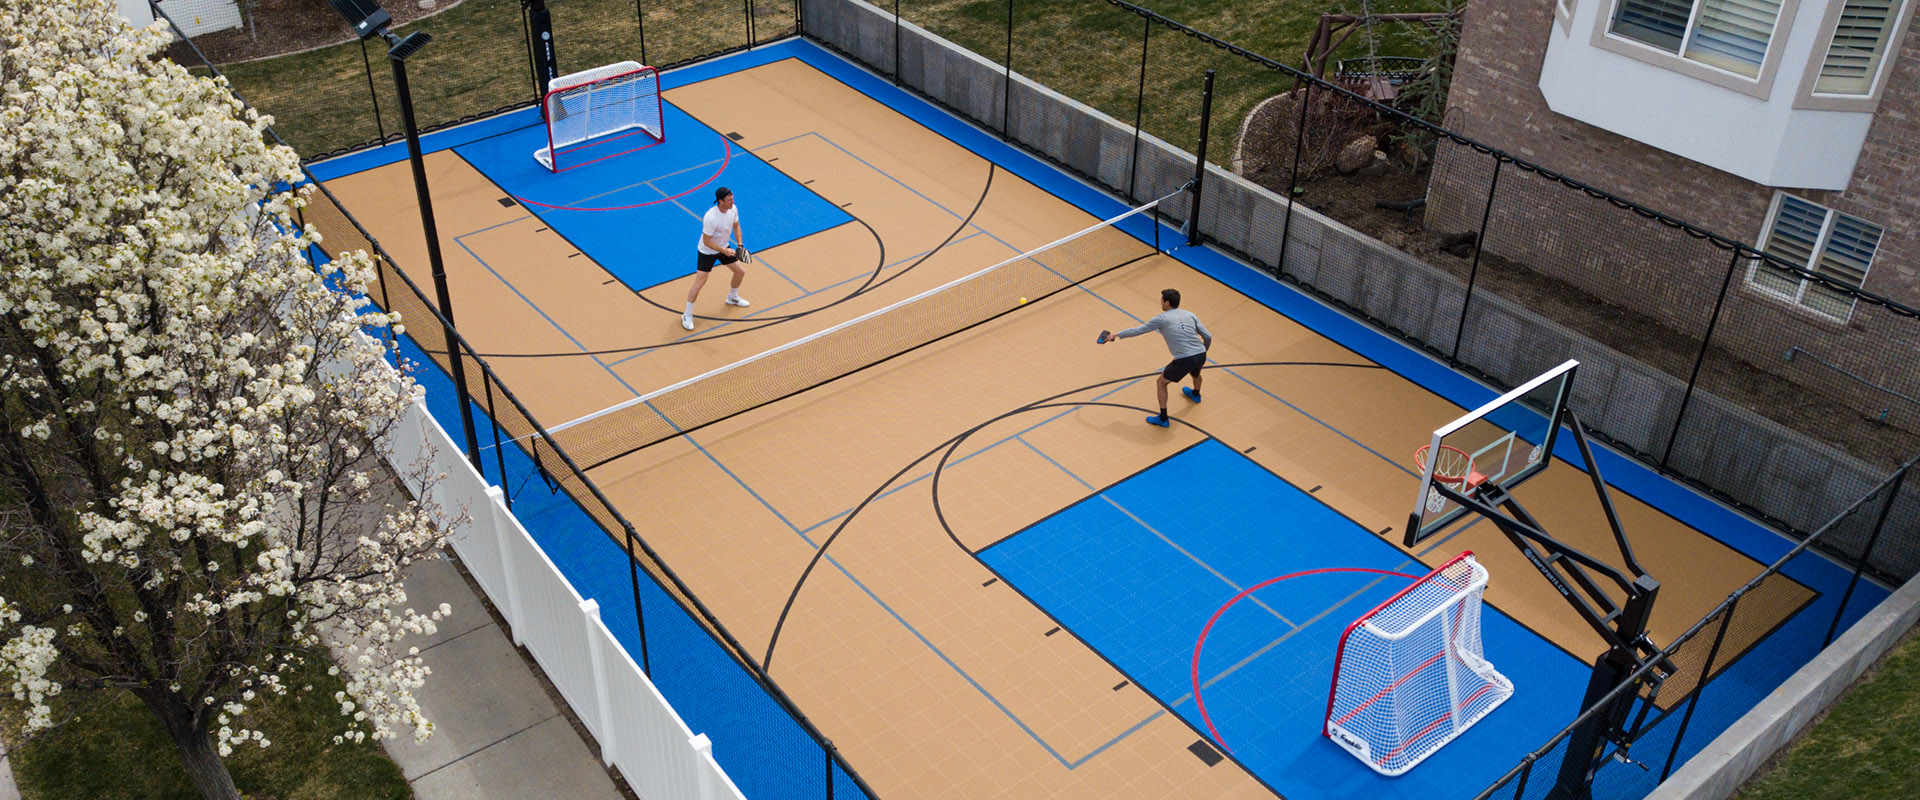 Two men playing Pickleball on a backyard. multi-court in sand and bright blue colors